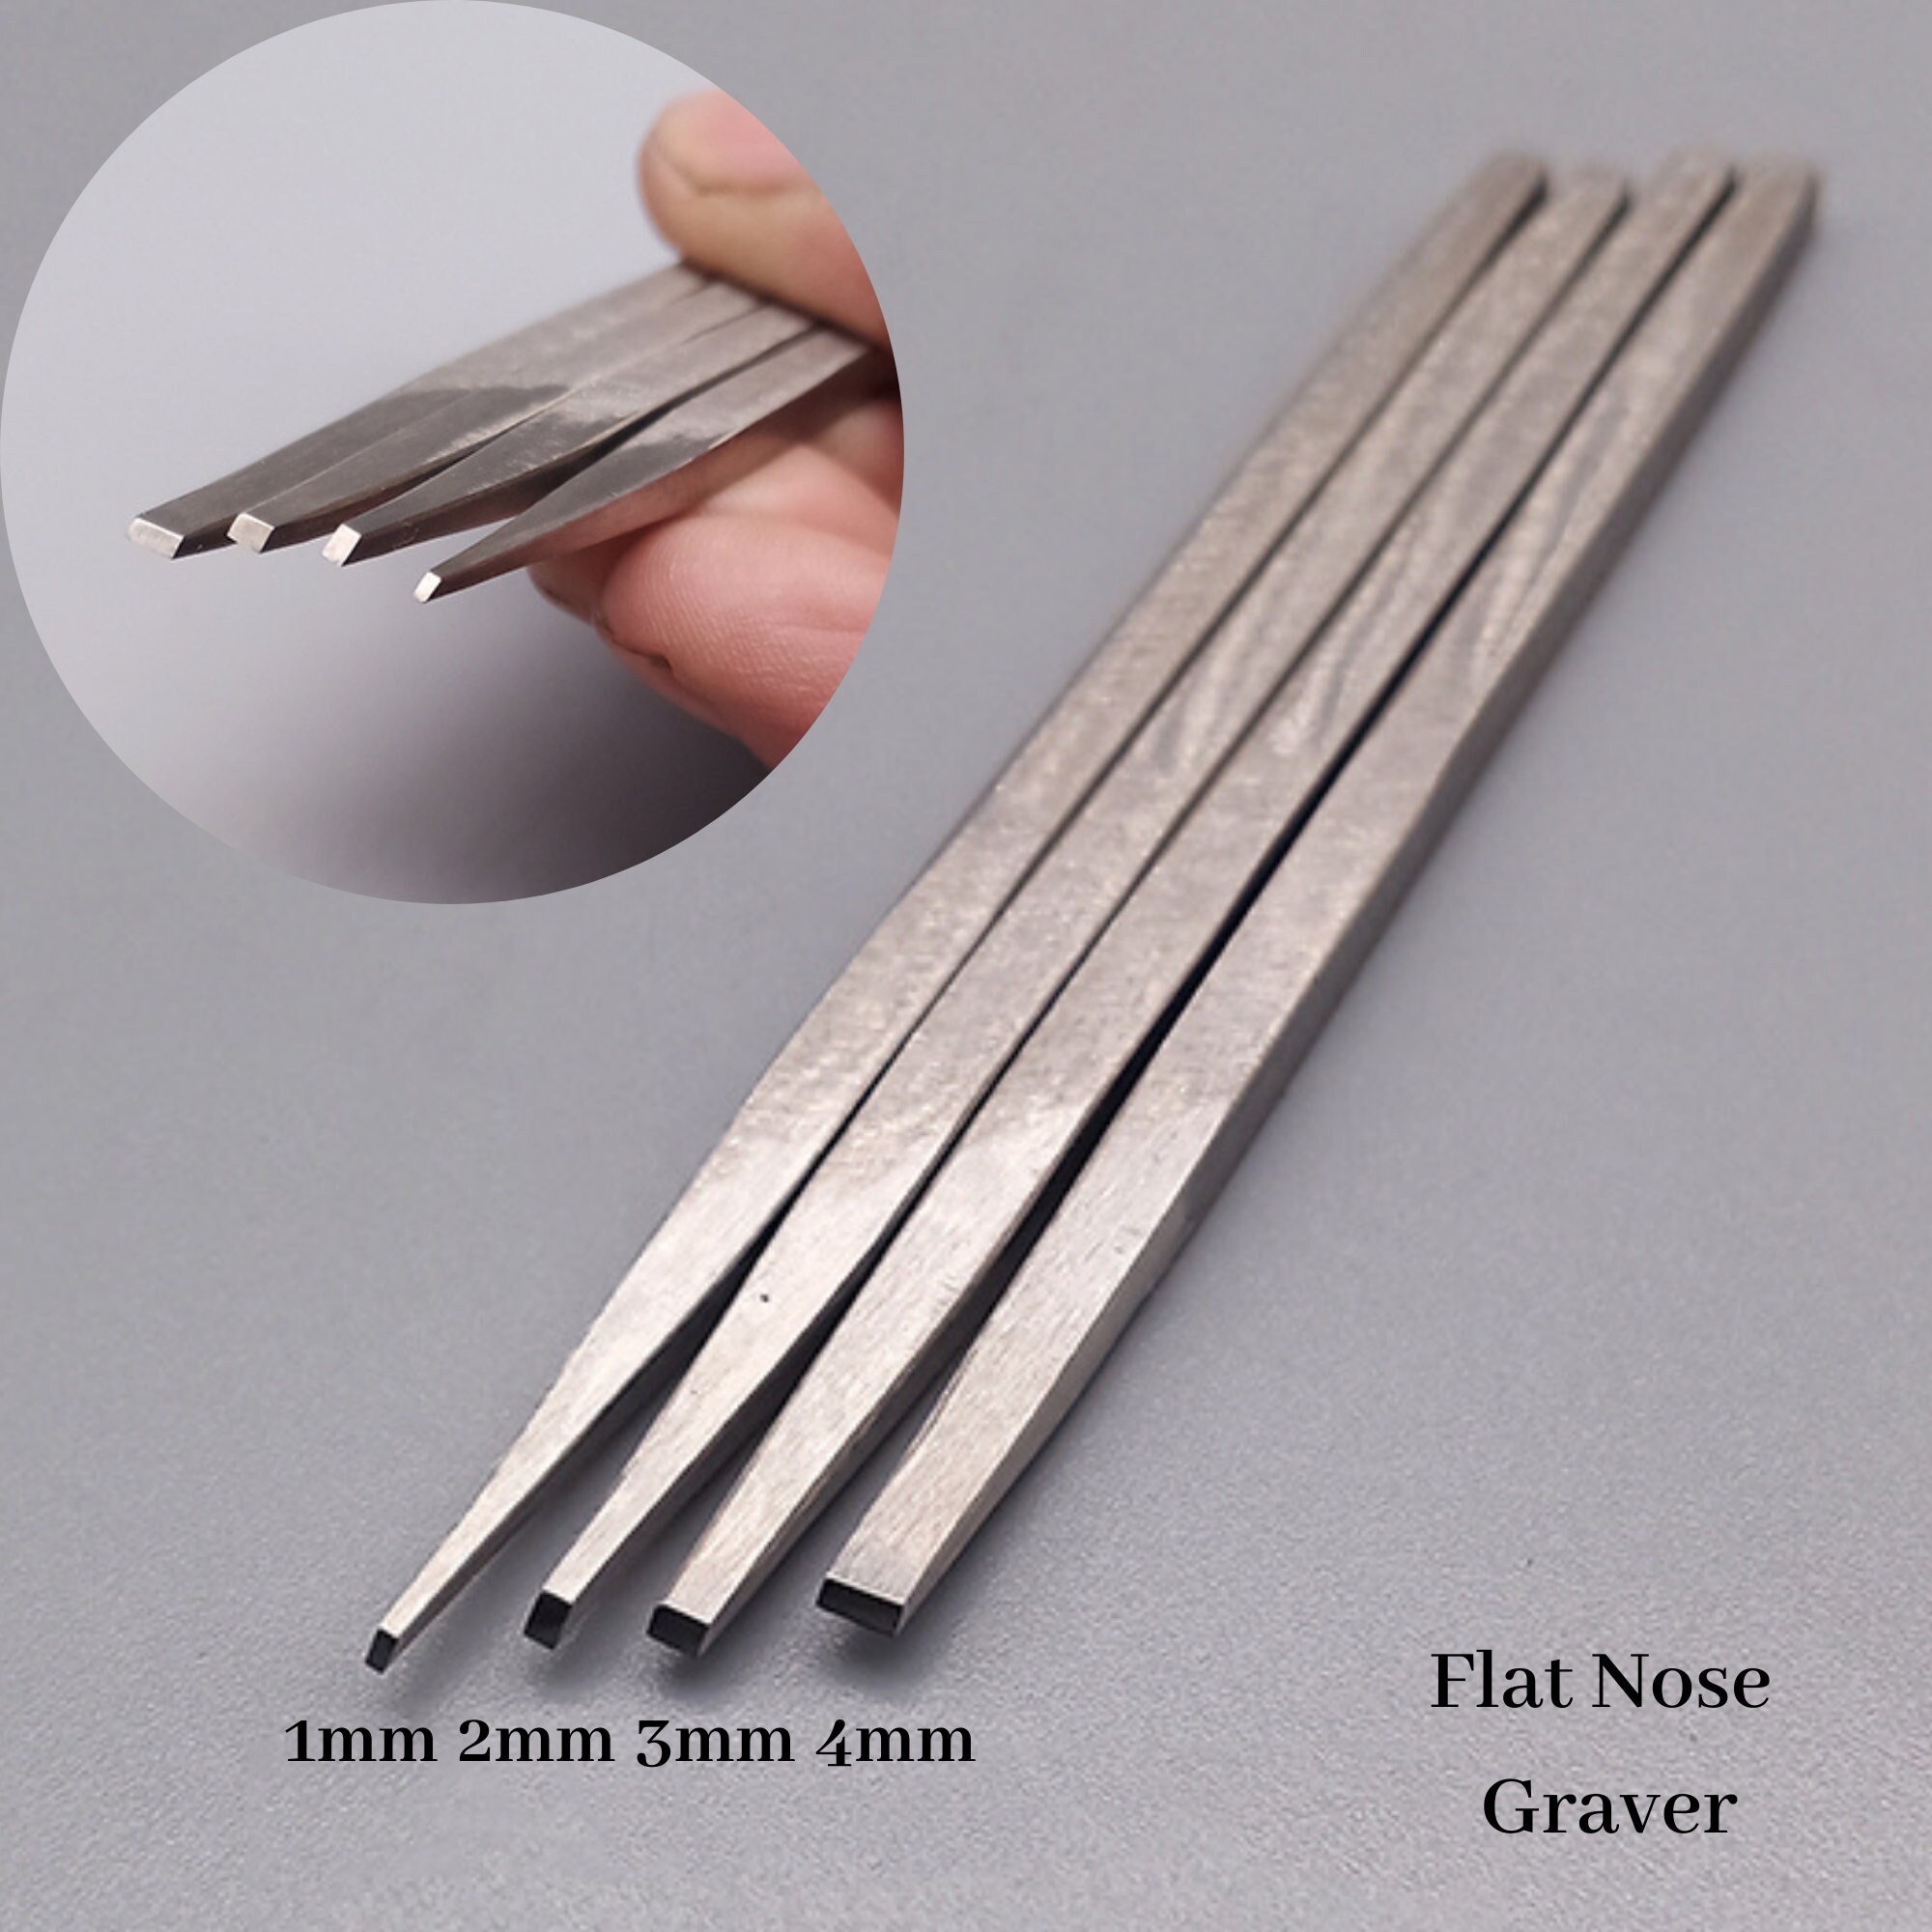 2 Pcs Stainless Steel Graver Narcissus Graver Narcissus Carving